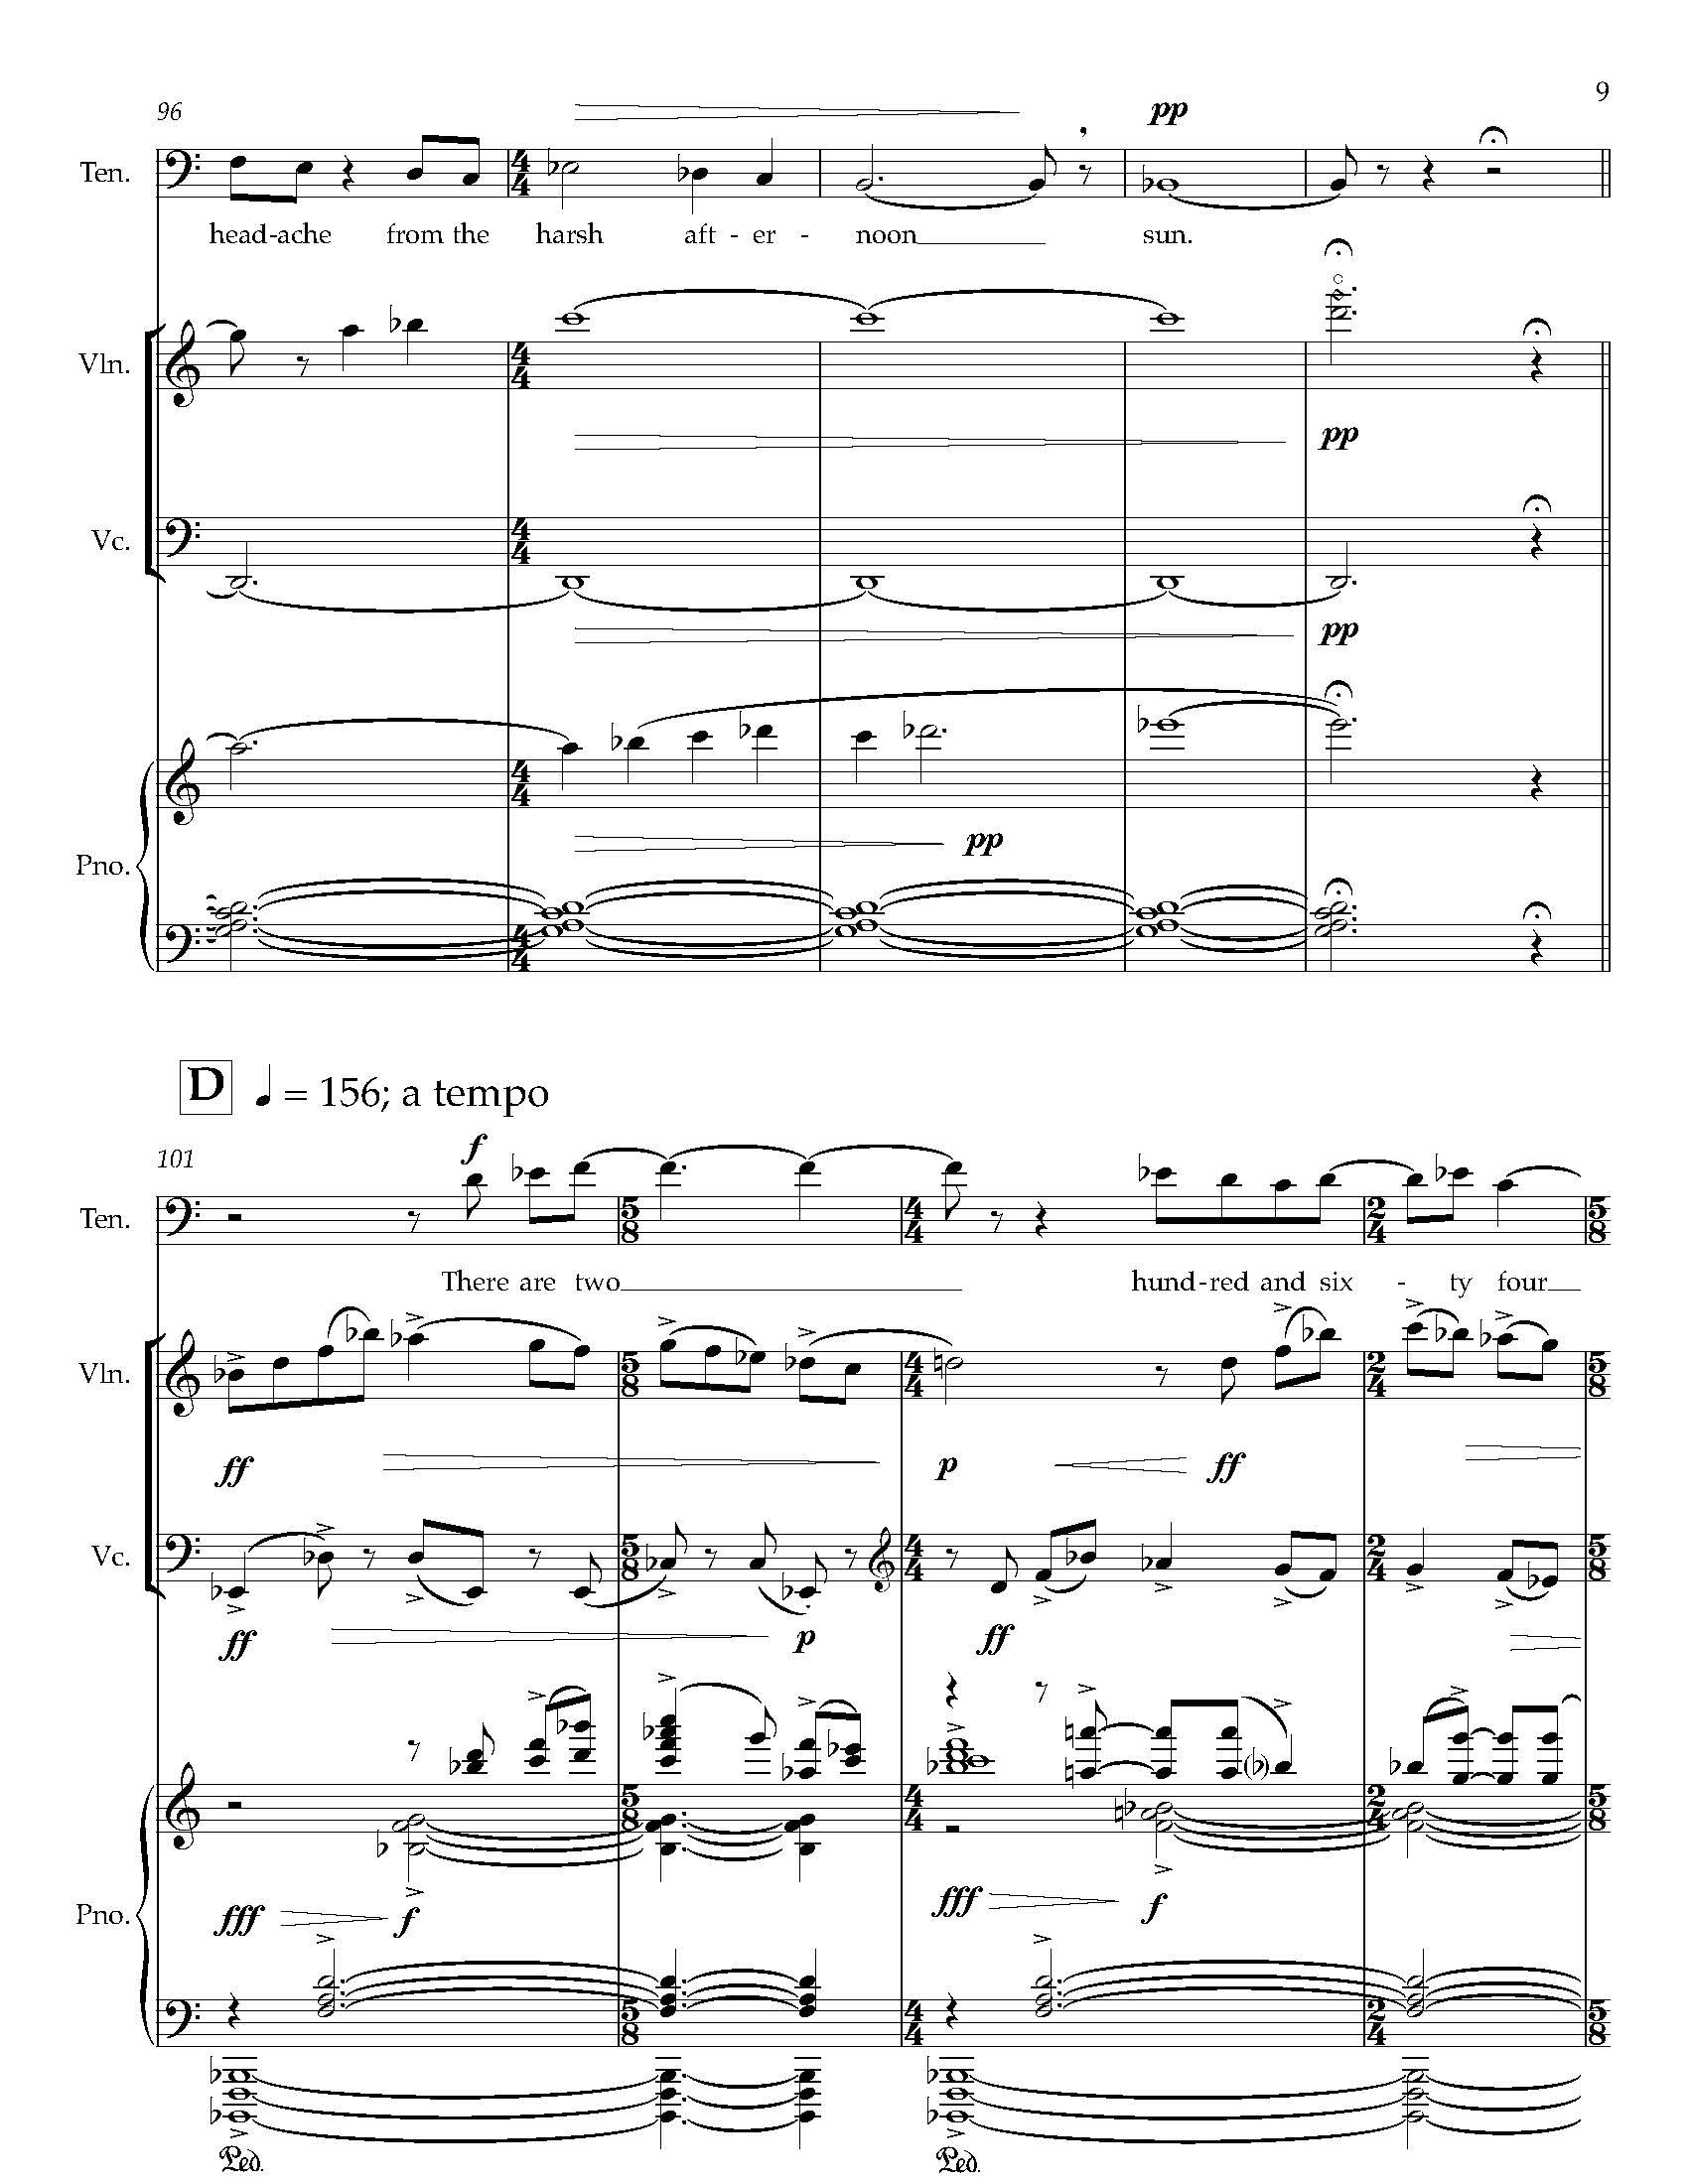 Gursky Songs - Complete Score_Page_17.jpg